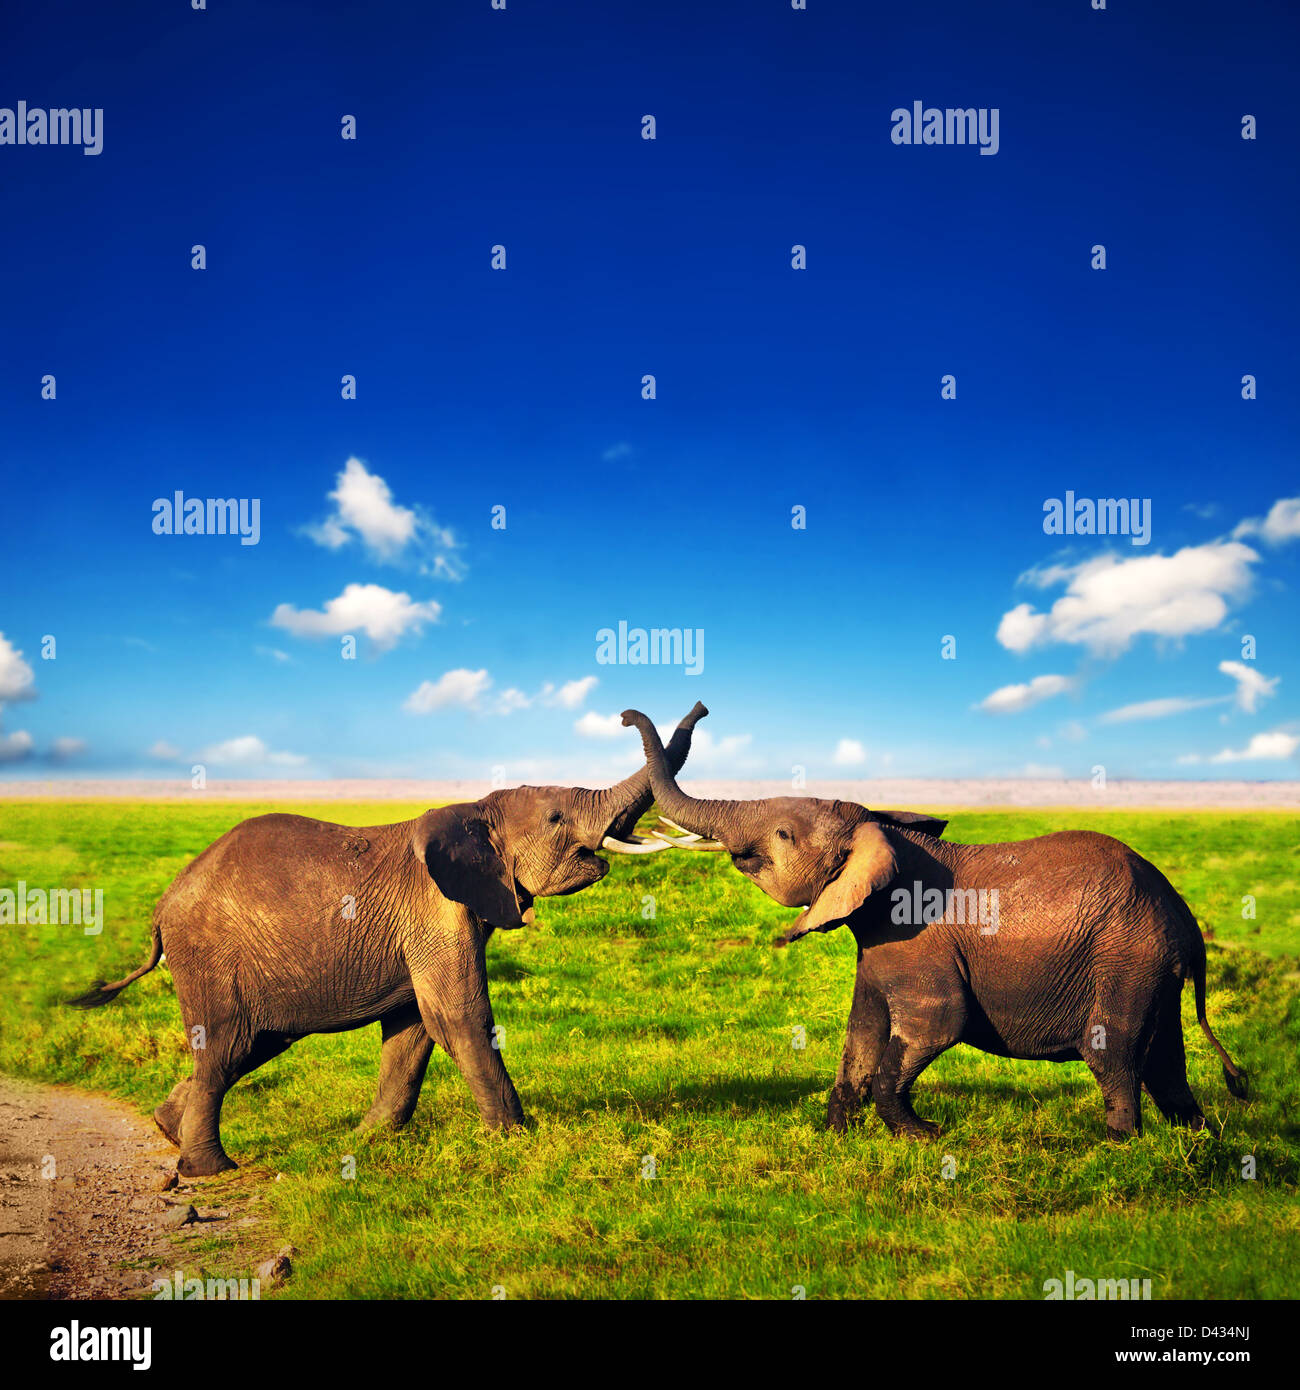 Two young male African Elephants playing with their trunks on African savanna, in Amboseli National Park, Kenya, Africa Stock Photo